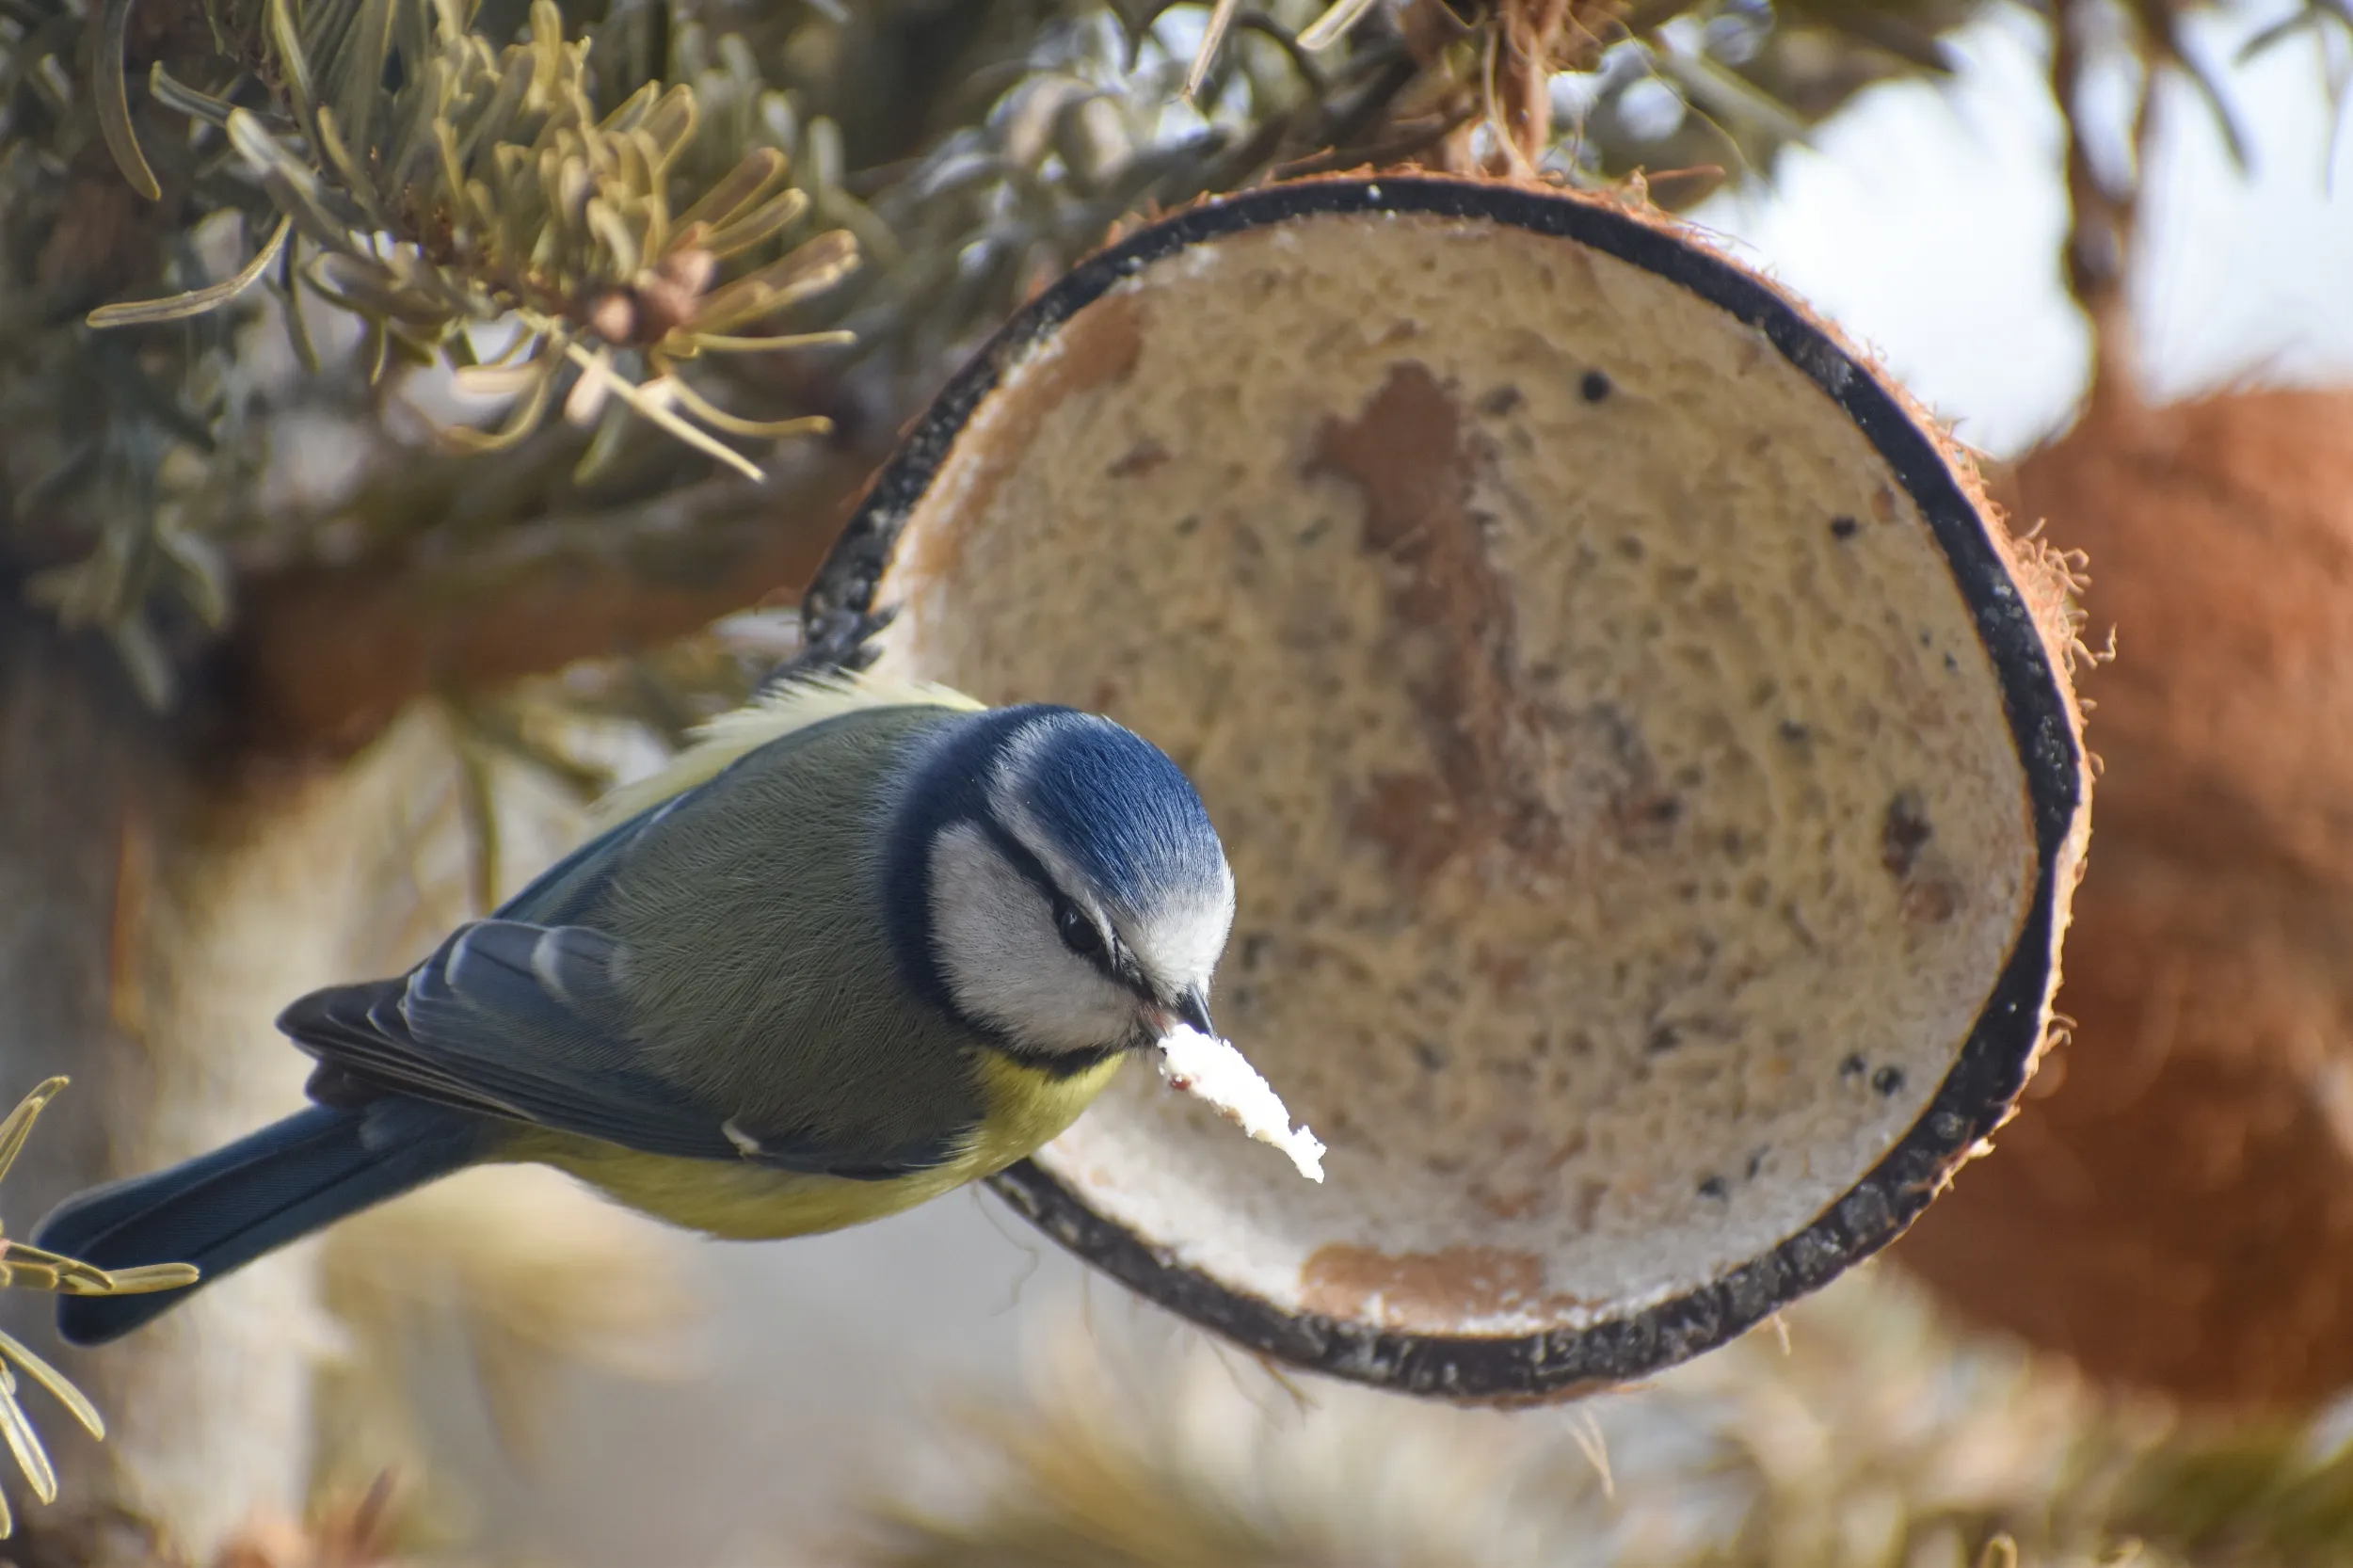 Blue Tit perched on hanging coconut shell feeder with a piece of suet in its beak.